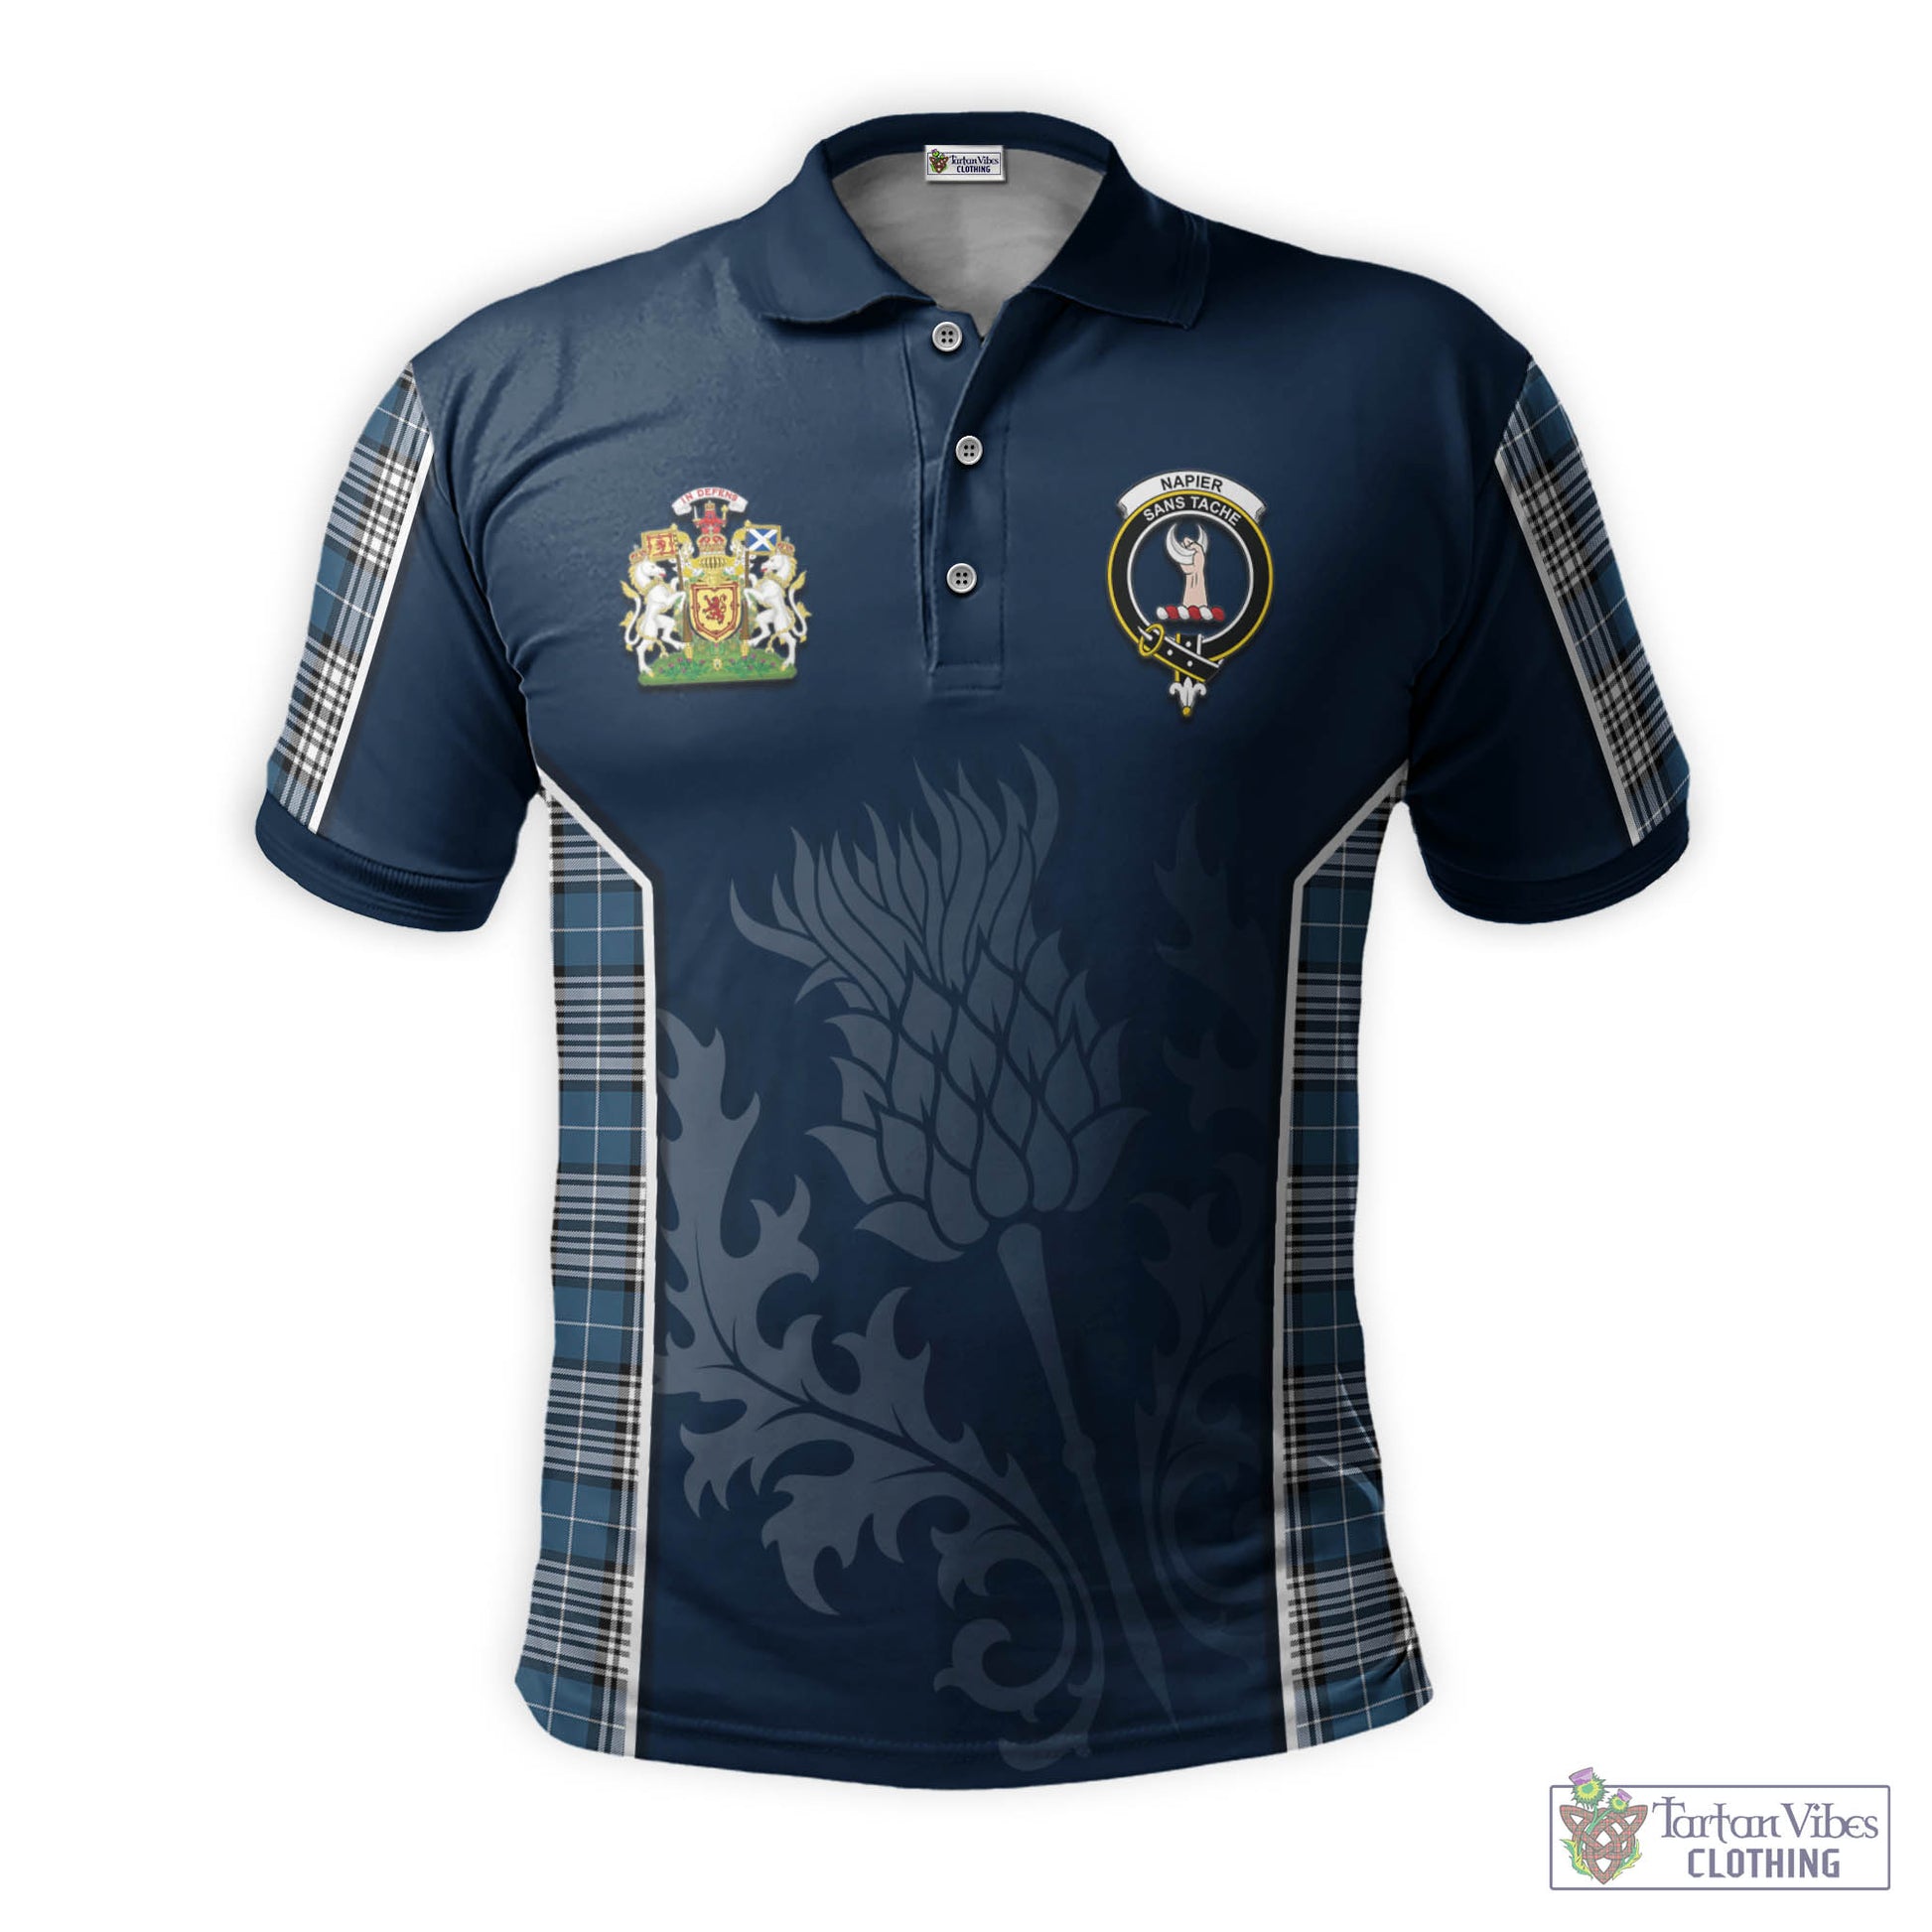 Tartan Vibes Clothing Napier Modern Tartan Men's Polo Shirt with Family Crest and Scottish Thistle Vibes Sport Style